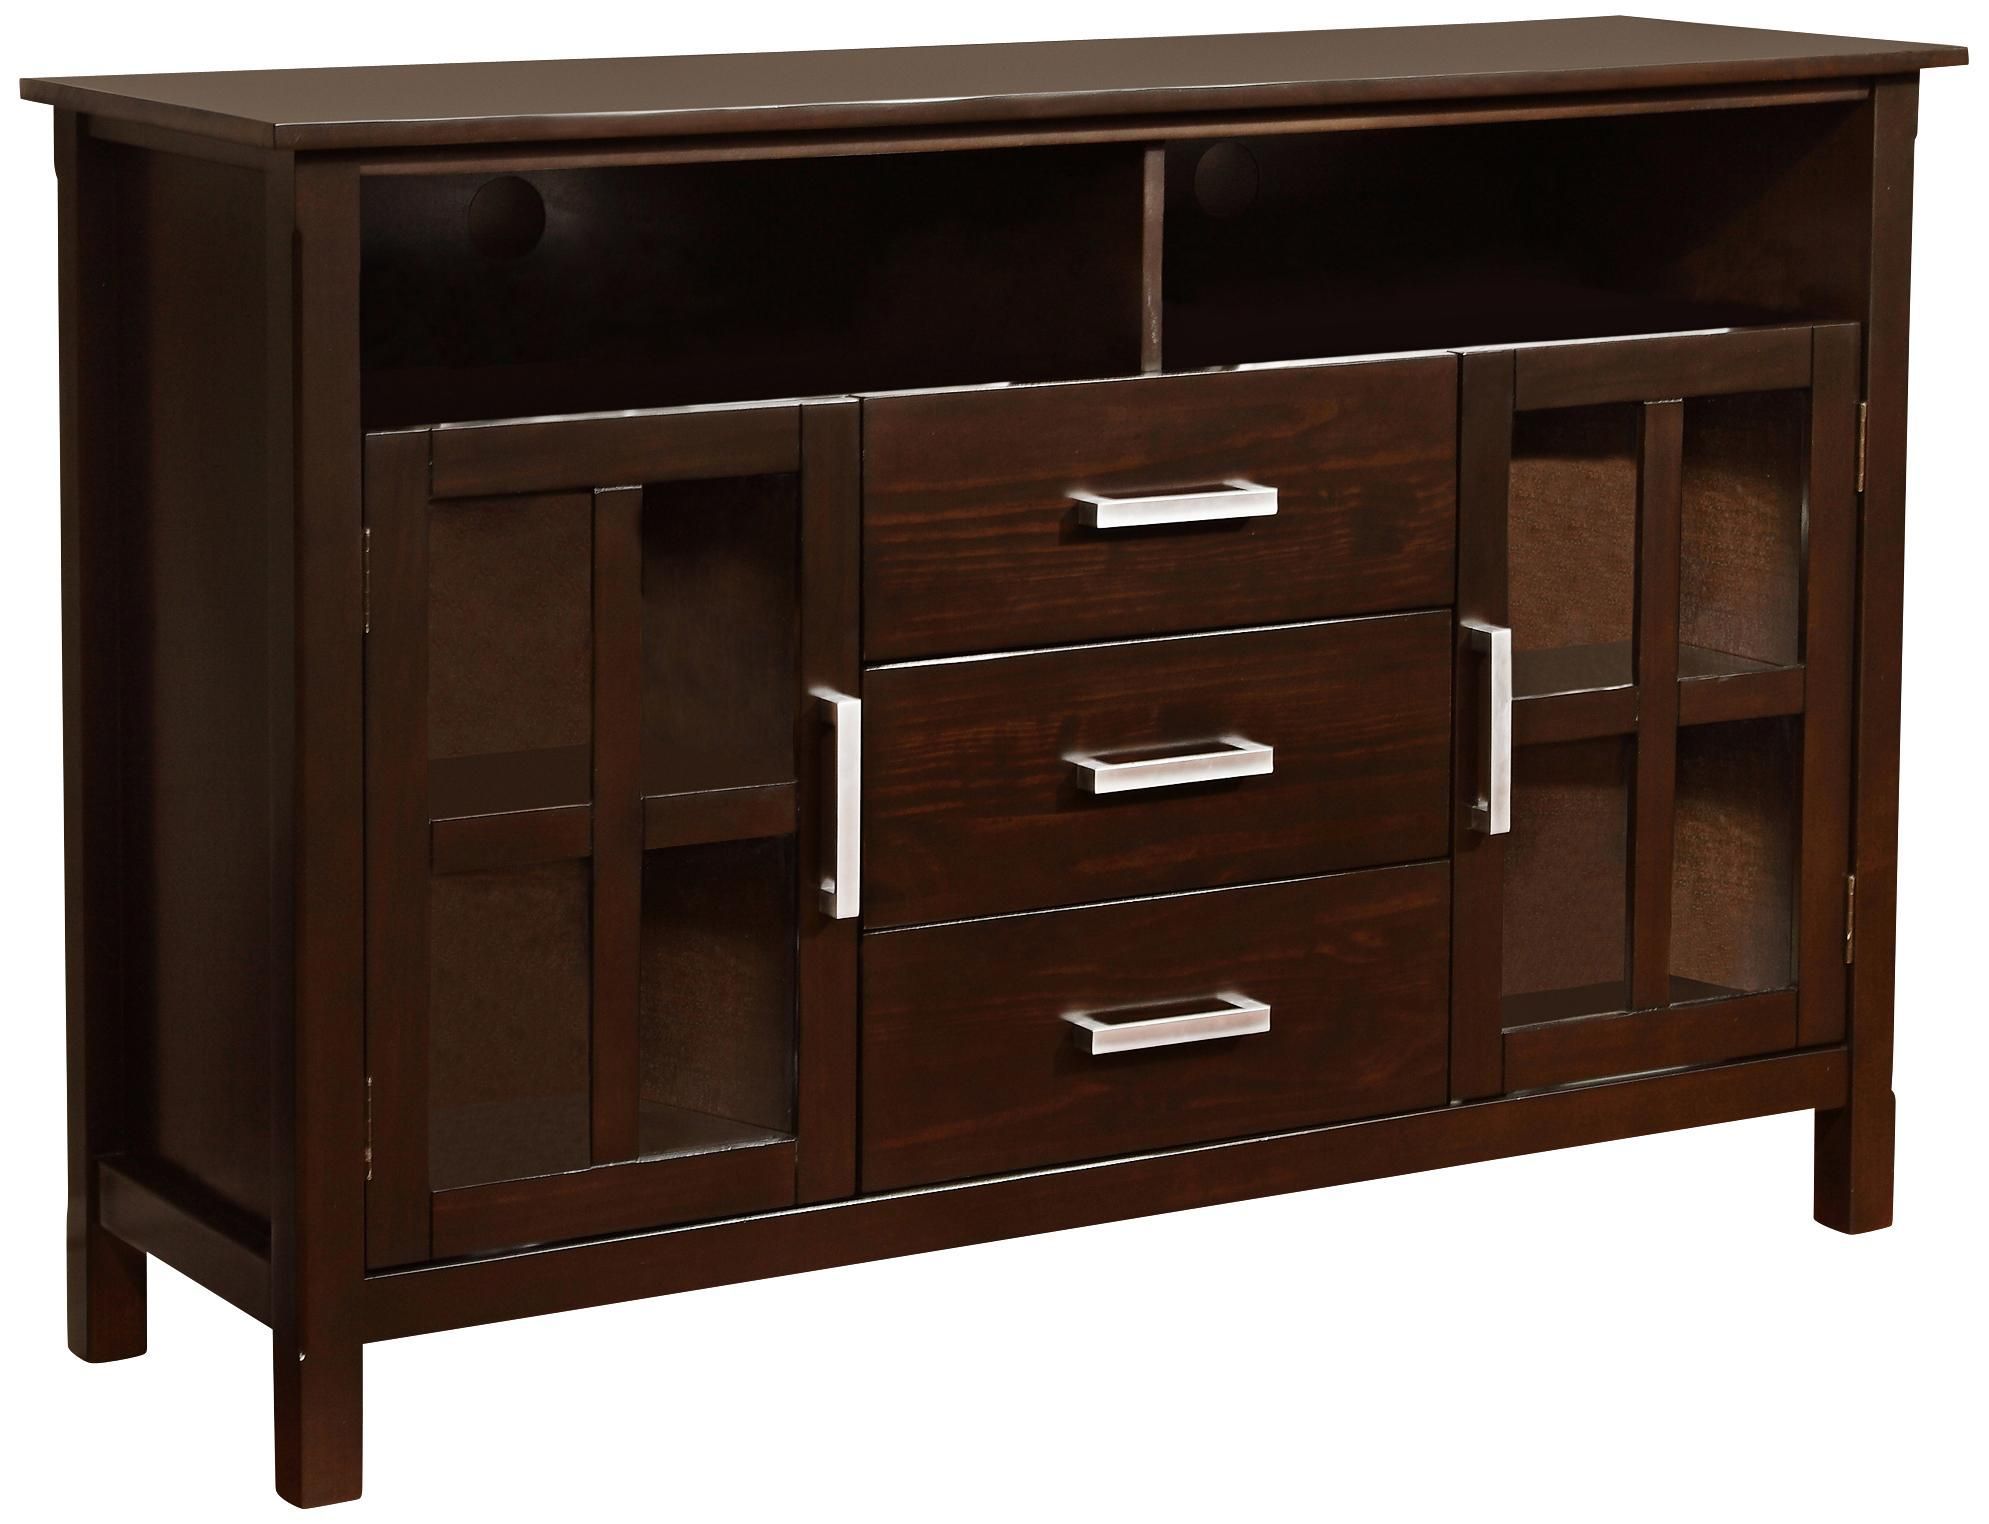 Kitchener 2 Door Walnut Brown Tall Tv Media Stand | Flat Pertaining To Dark Brown Tv Cabinets With 2 Sliding Doors And Drawer (View 7 of 15)